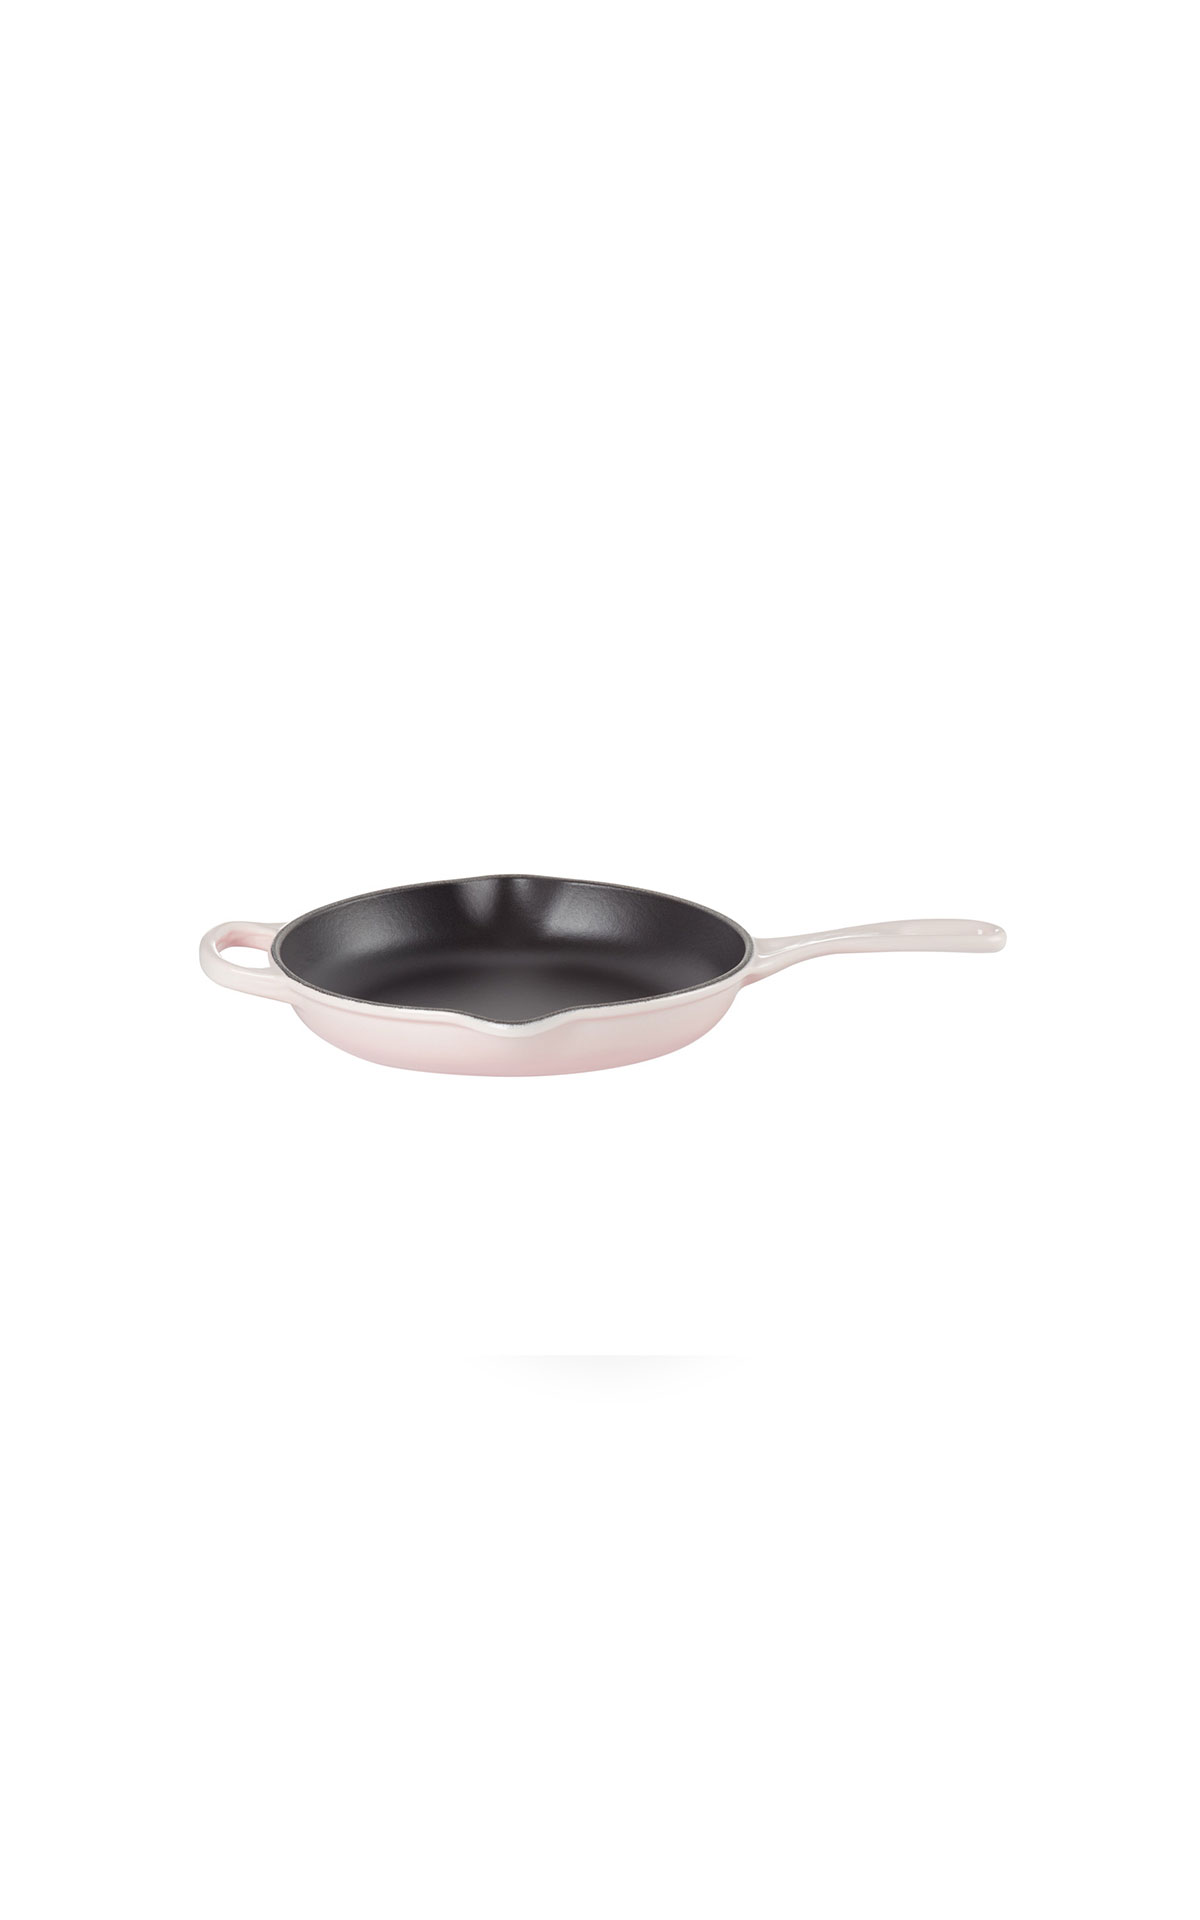 Le Creuset 23cm Cast iron skillet shell pink from Bicester Village